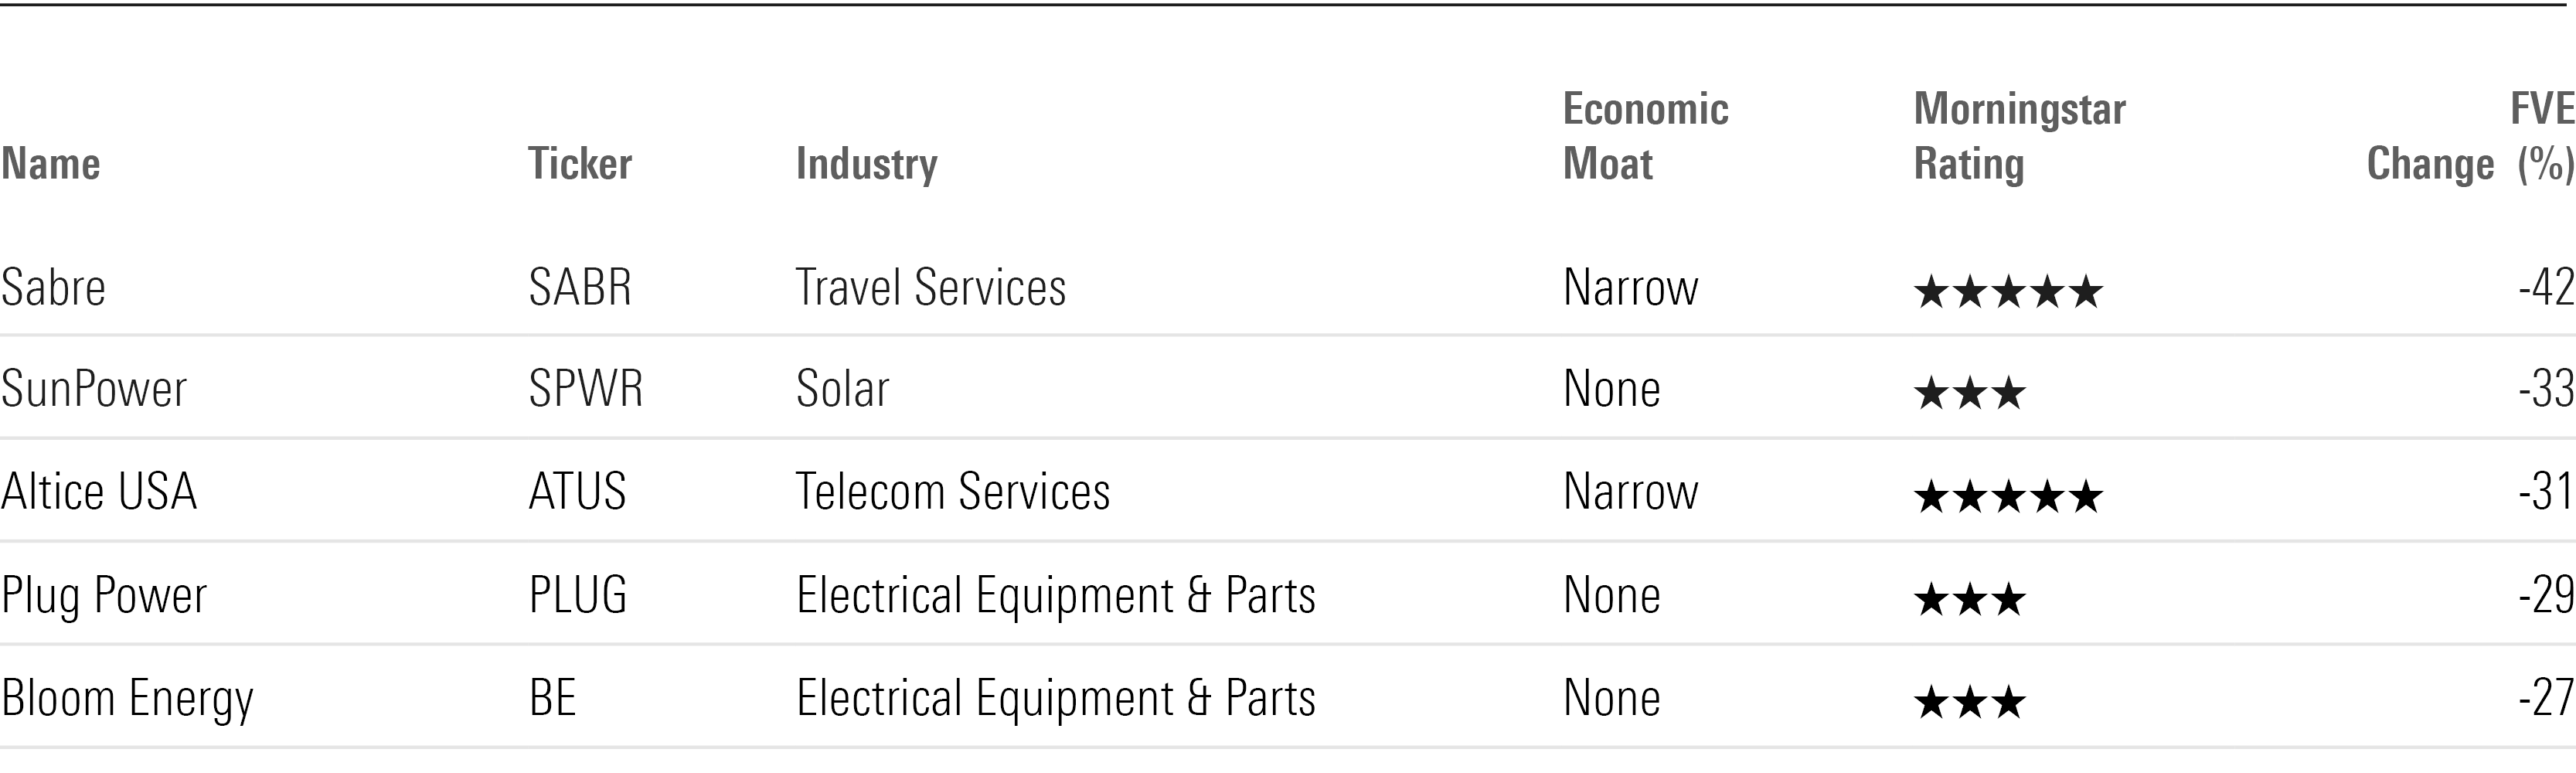 Table showing key metrics for the stocks with the largest fair value estimate cuts after Q4 2023 earnings.